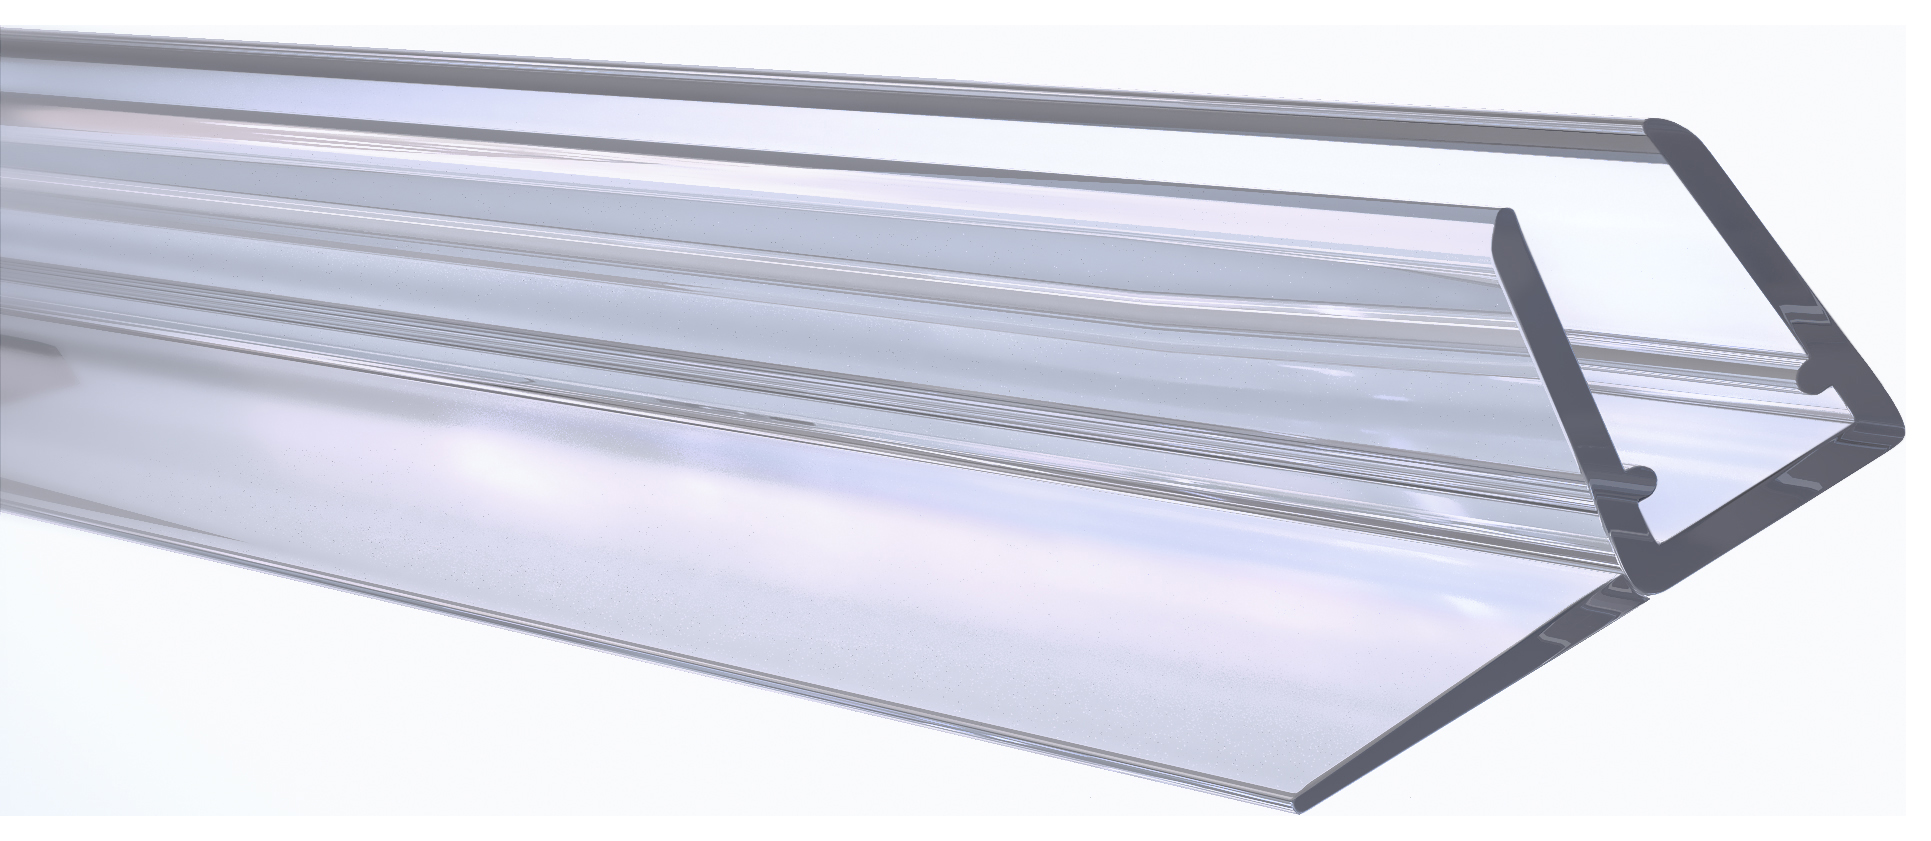 Image of Wickes Shower Screen Angled Side Seal - 6 x 2000mm